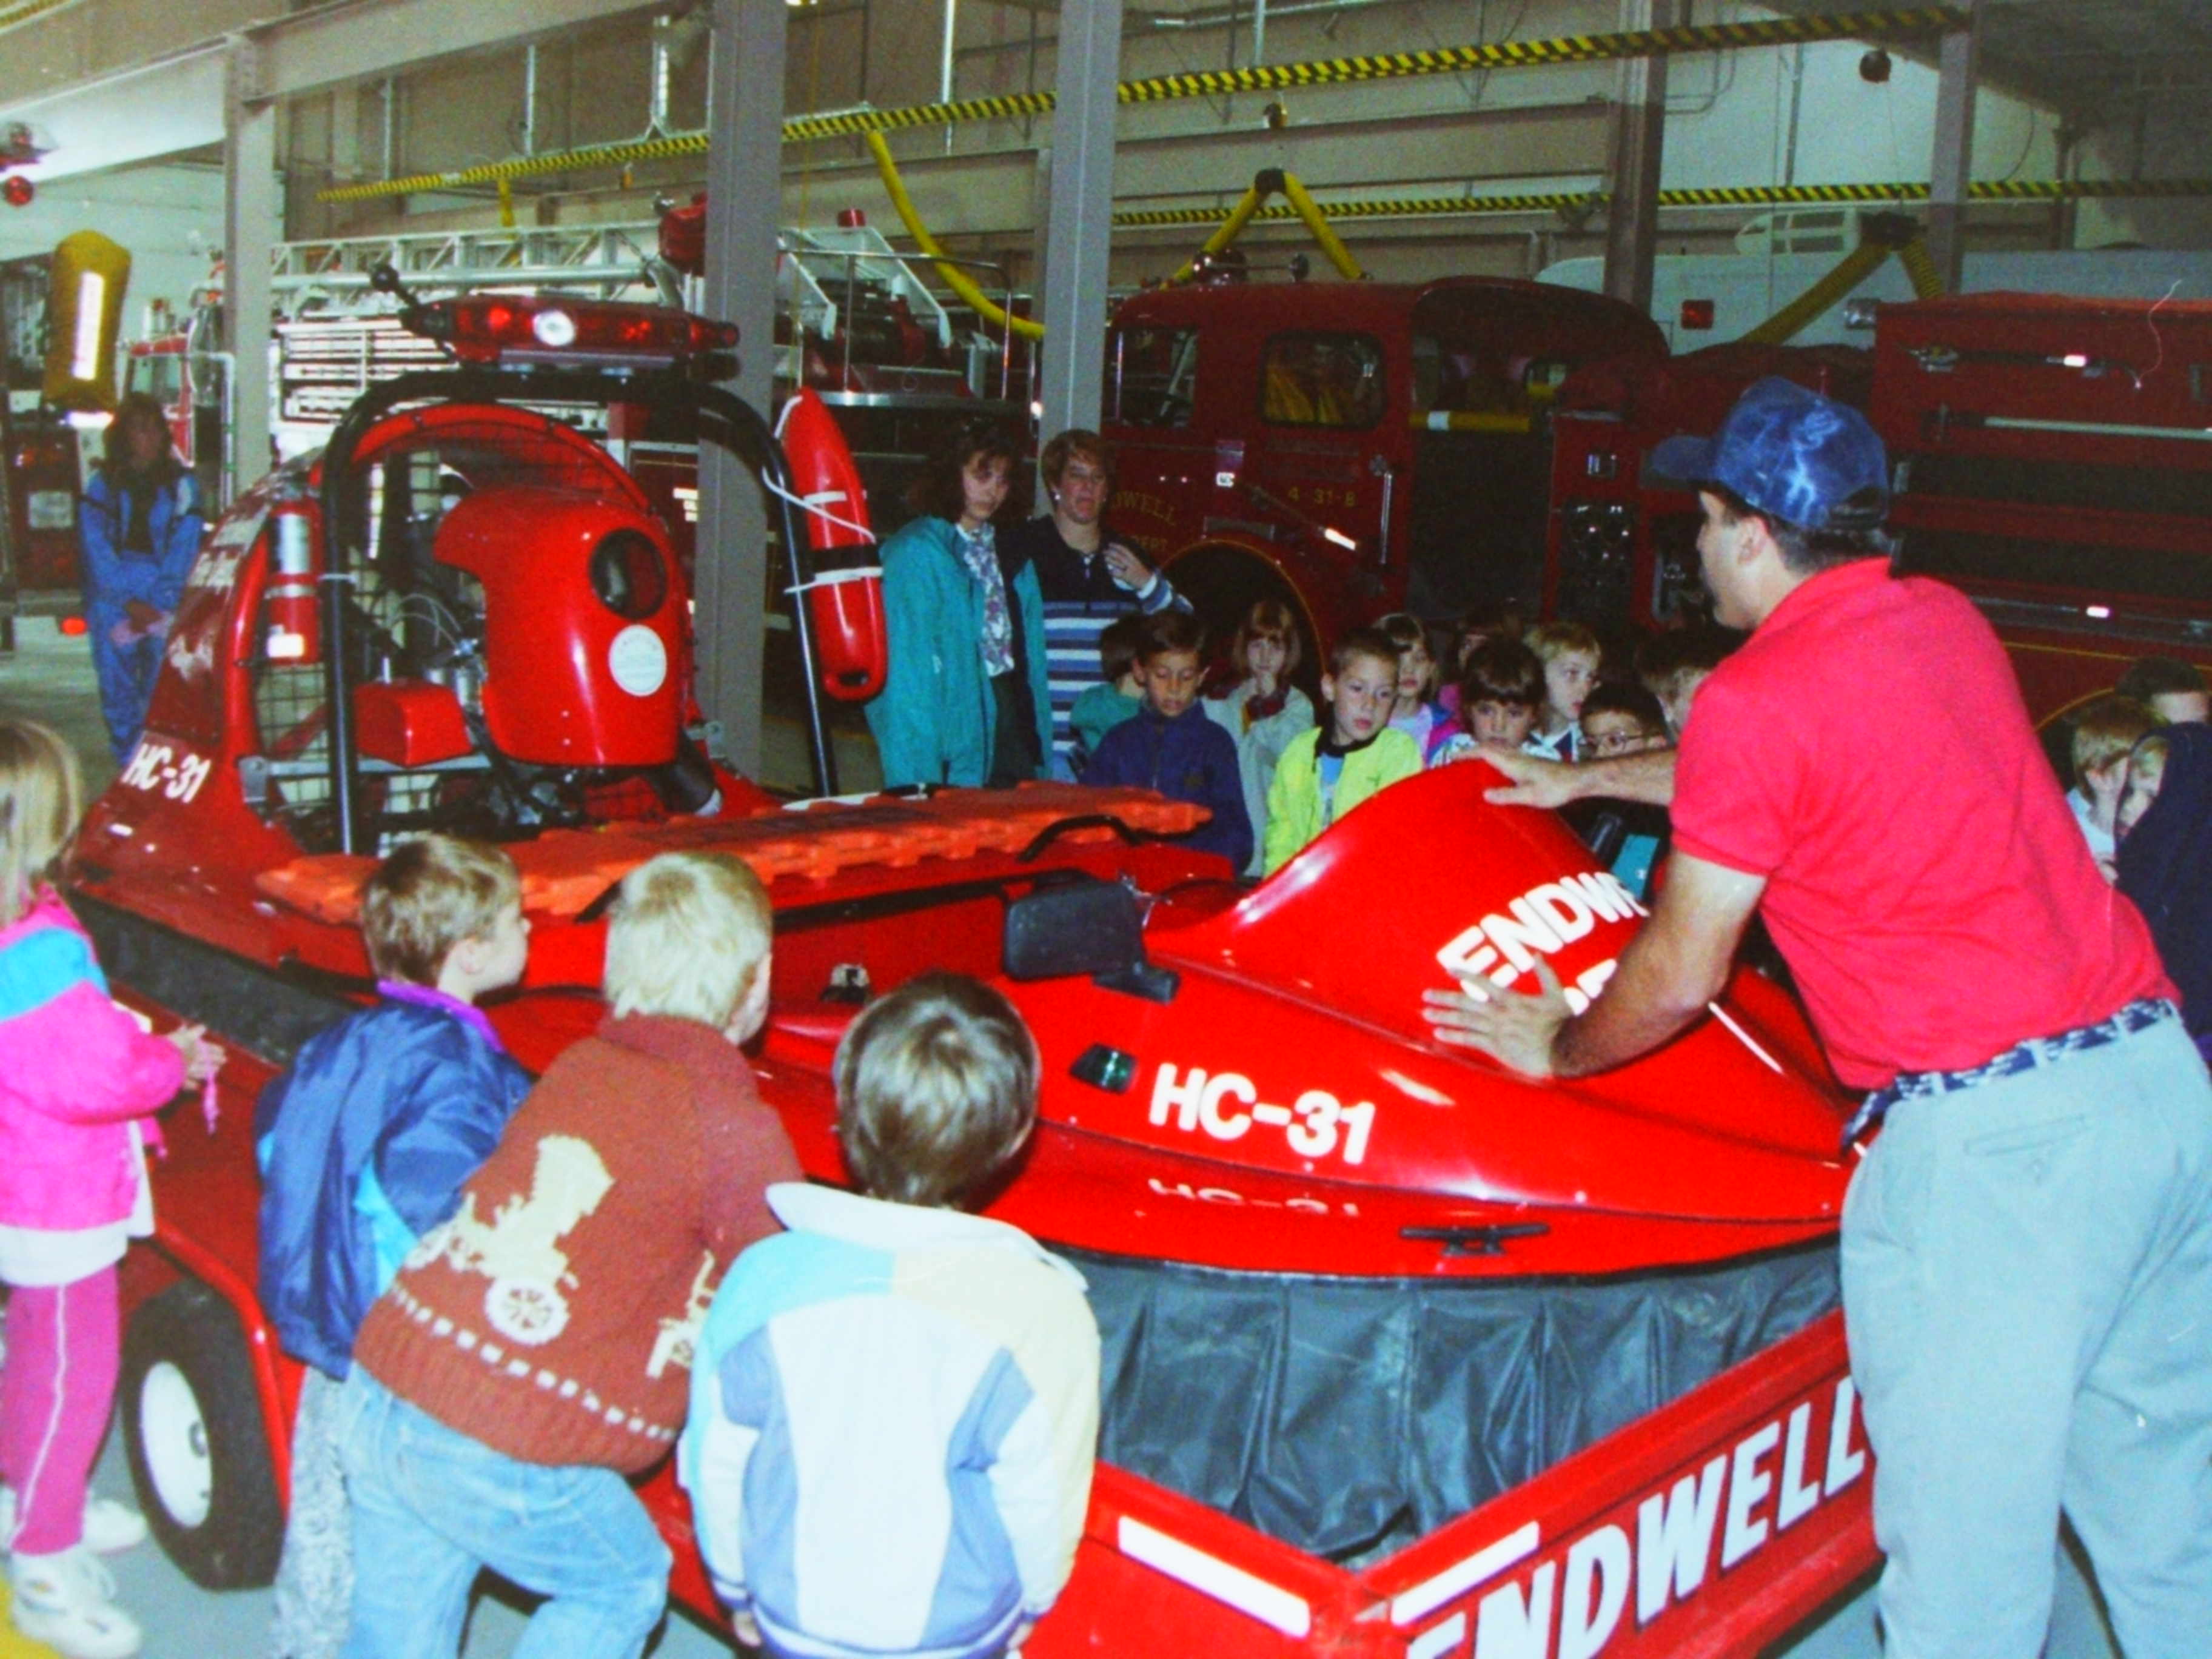 11-01-94  Other - Fire Safety Classes